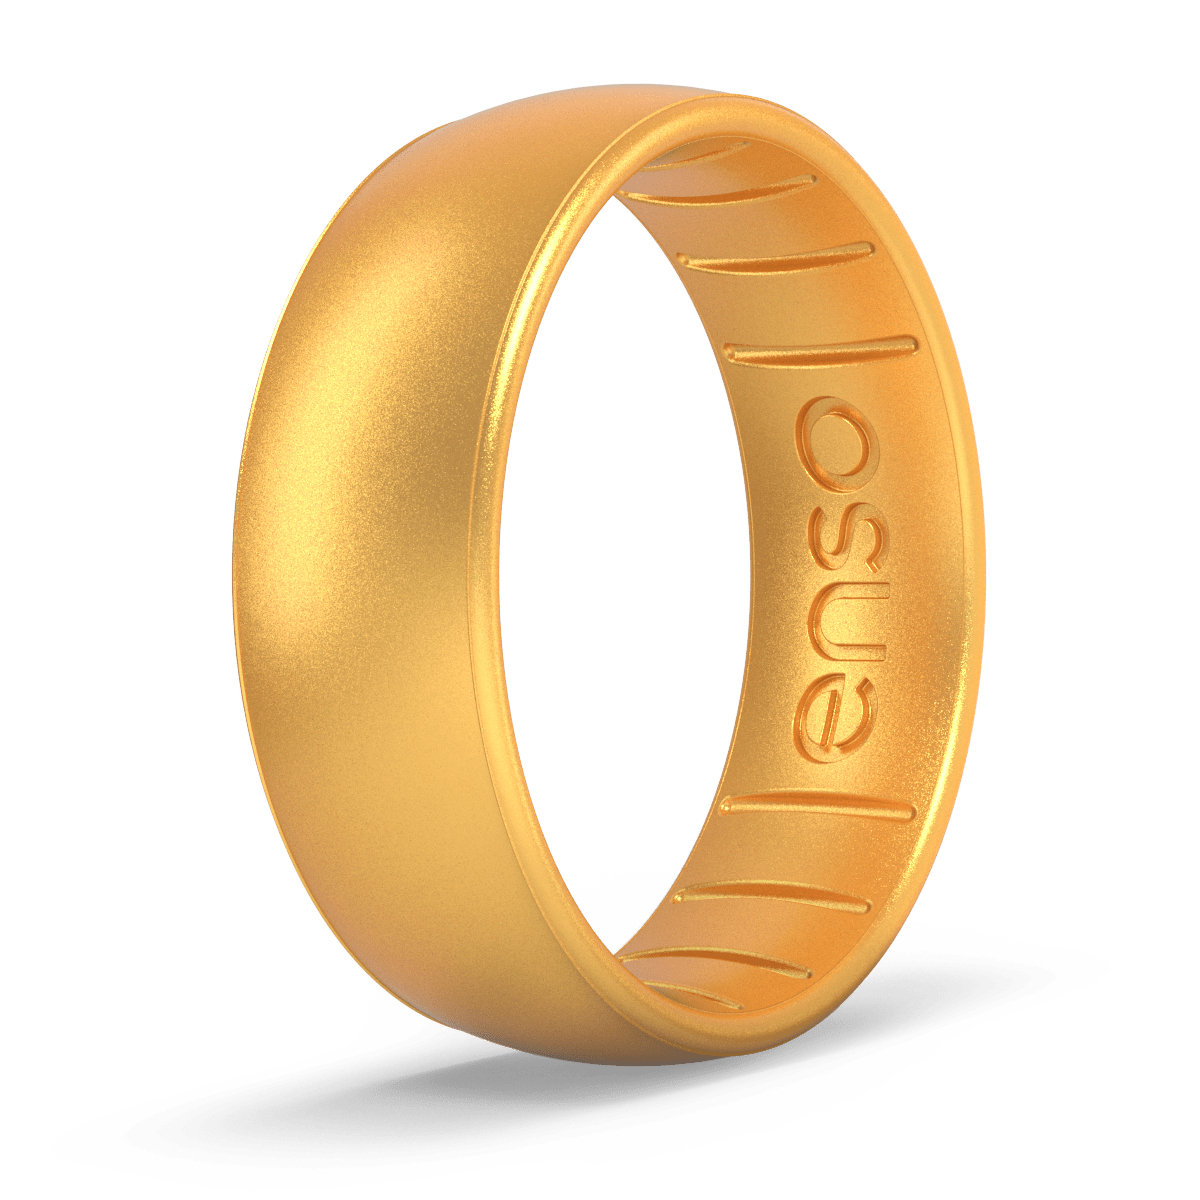 Elements Classic Silicone Ring - Gold - Men's Wedding Rings - Manly Bands